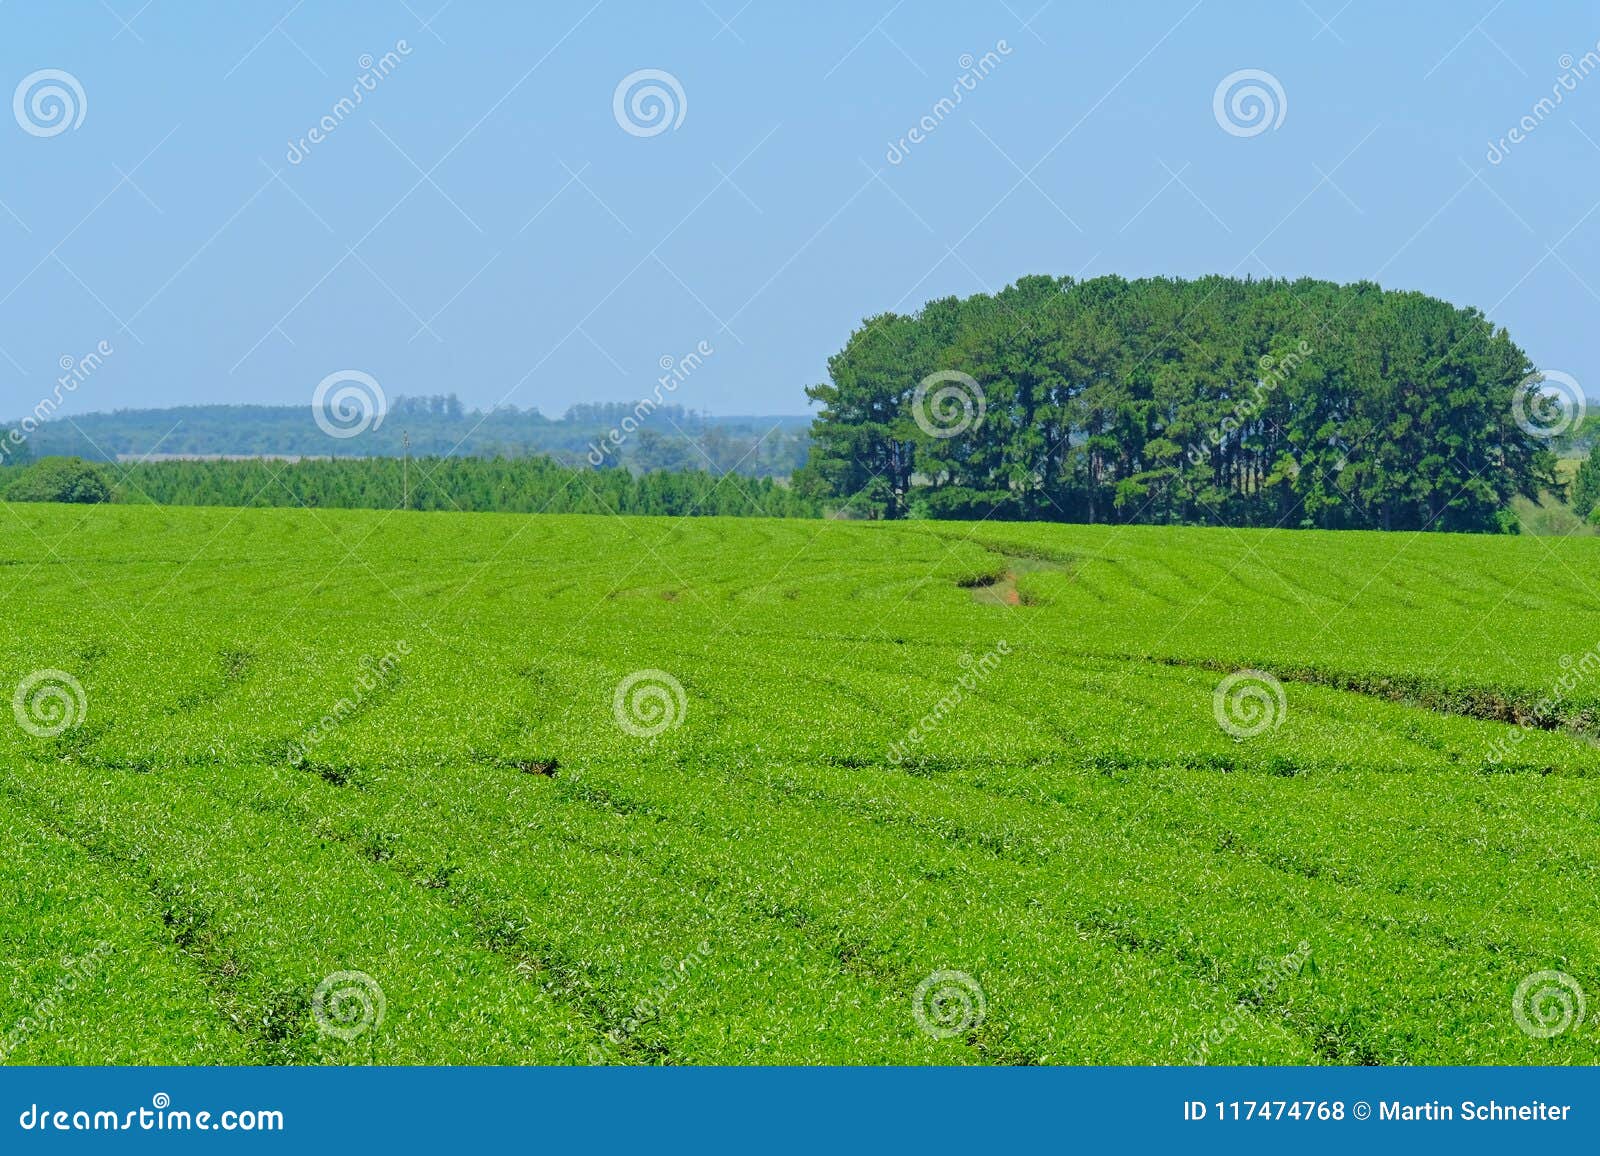 beautiful green mate tea plantation field in province misiones, argentina